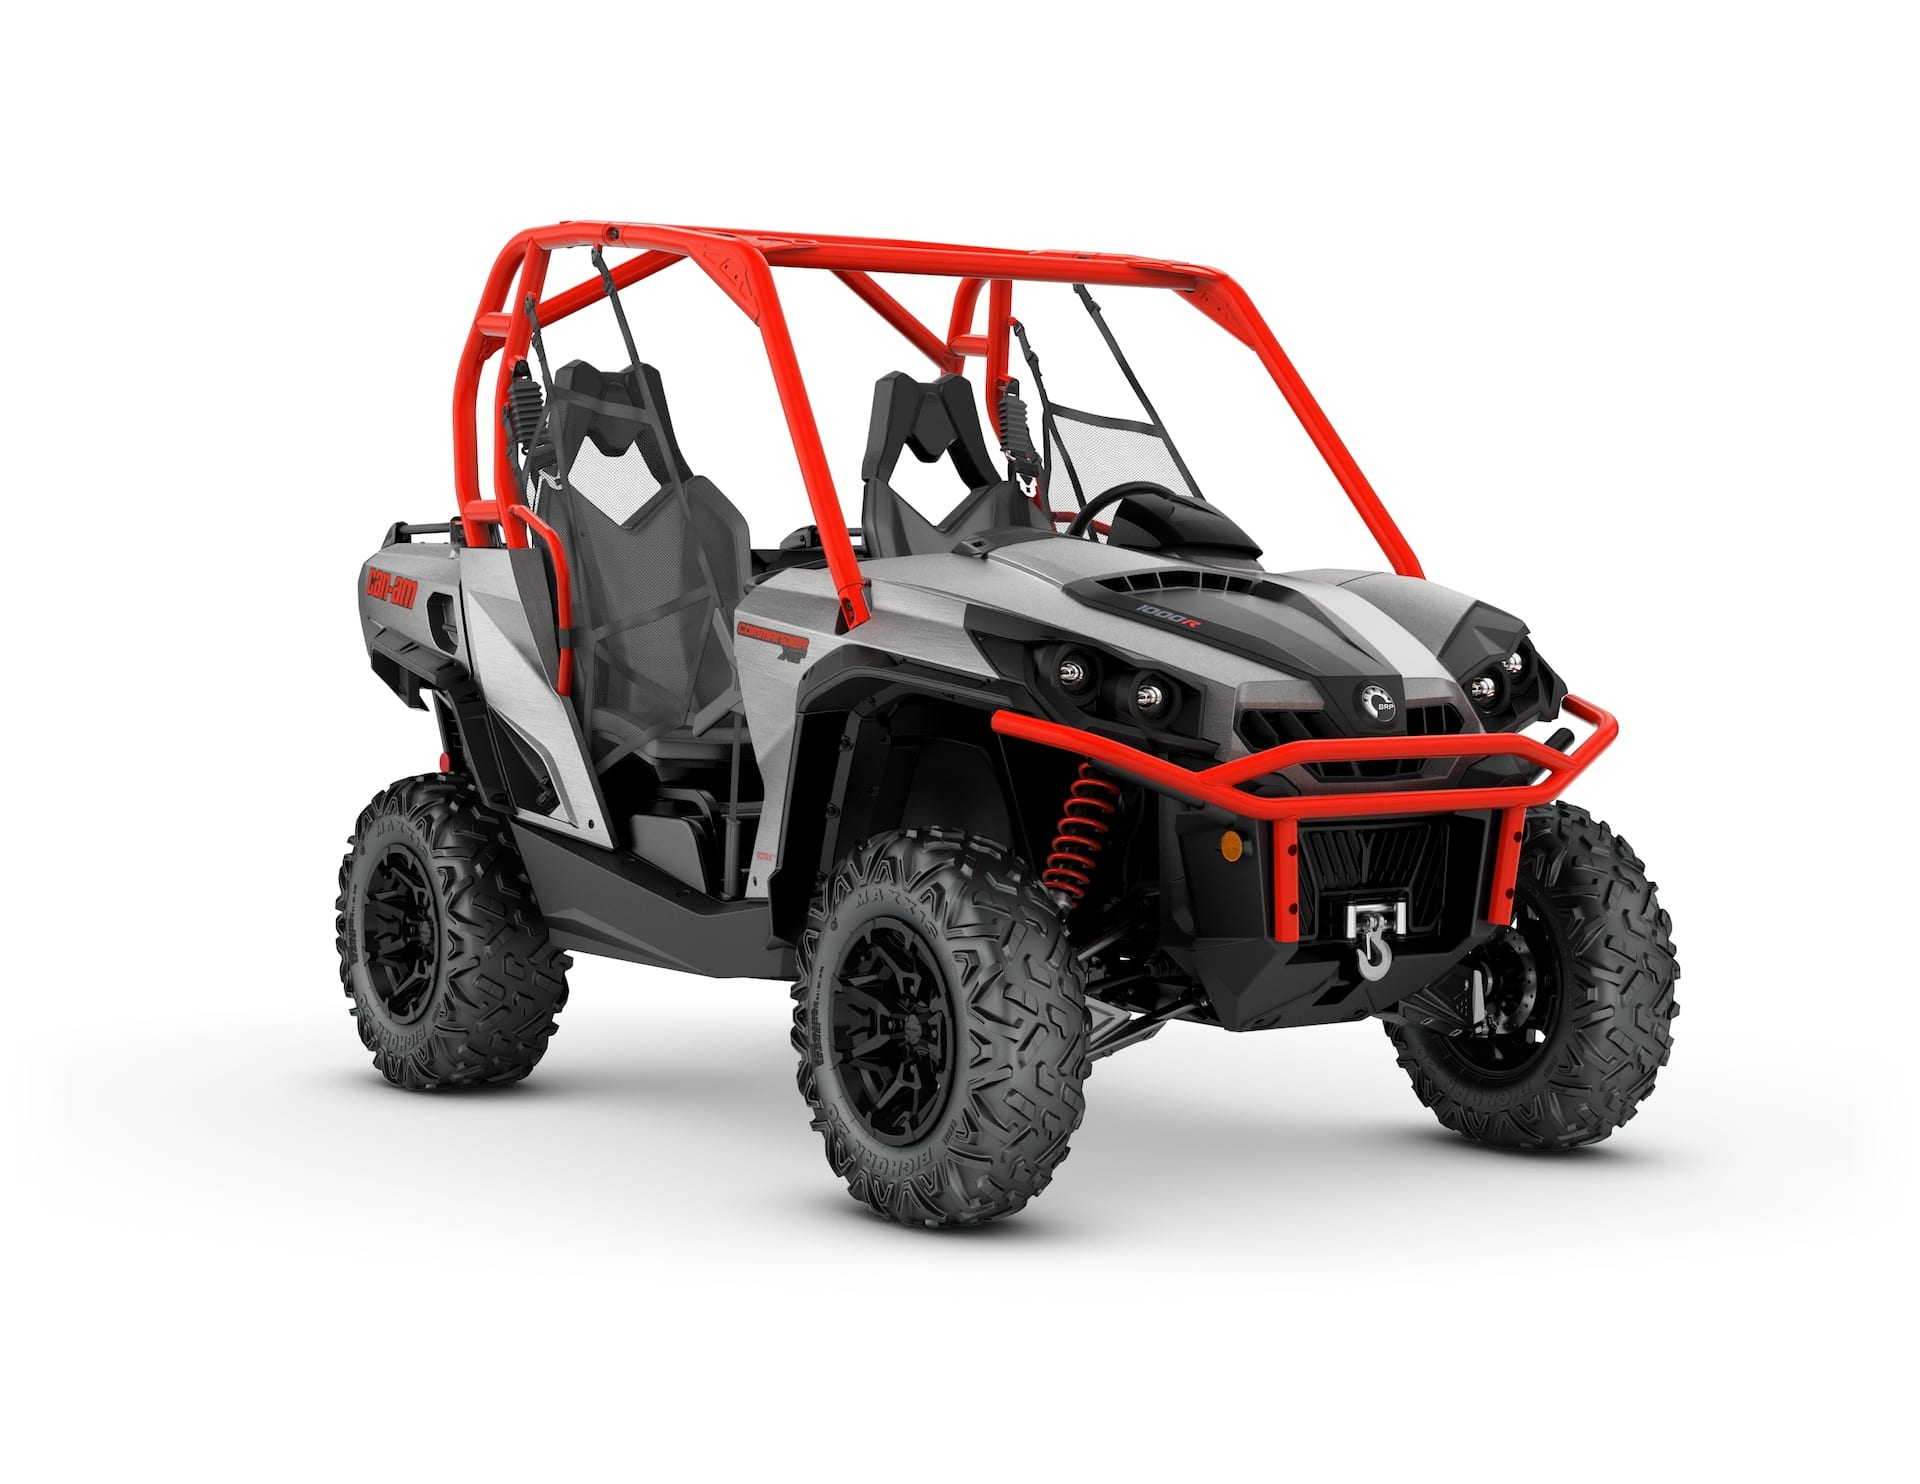 2018 Commander XT 1000R Brushed Aluminum and Can-Am Red